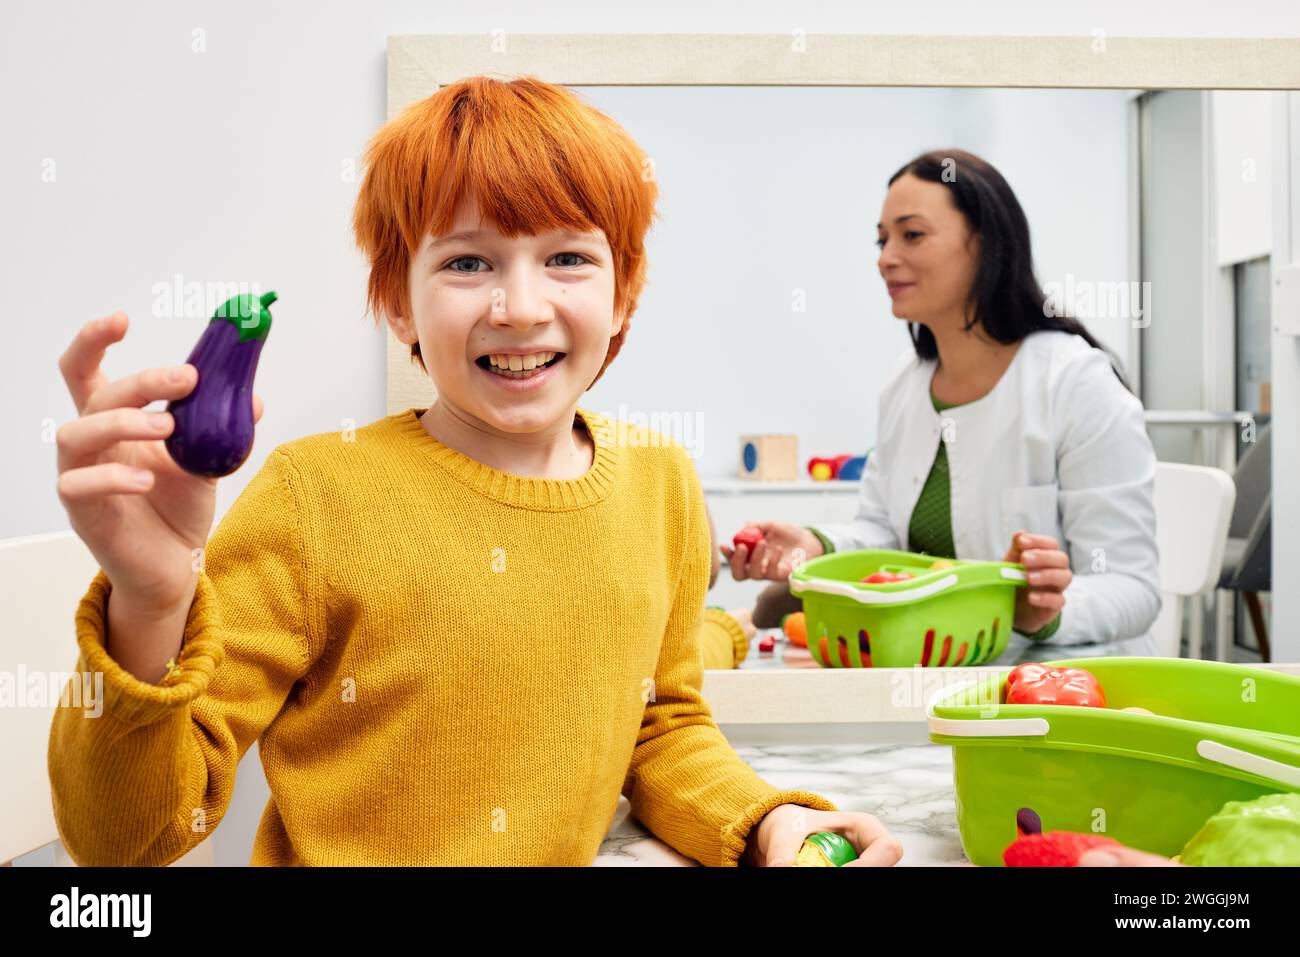 Red-haired boy holding toy eggplant during speech training session with his speech therapist. Children's speech and language therapy Stock Photo